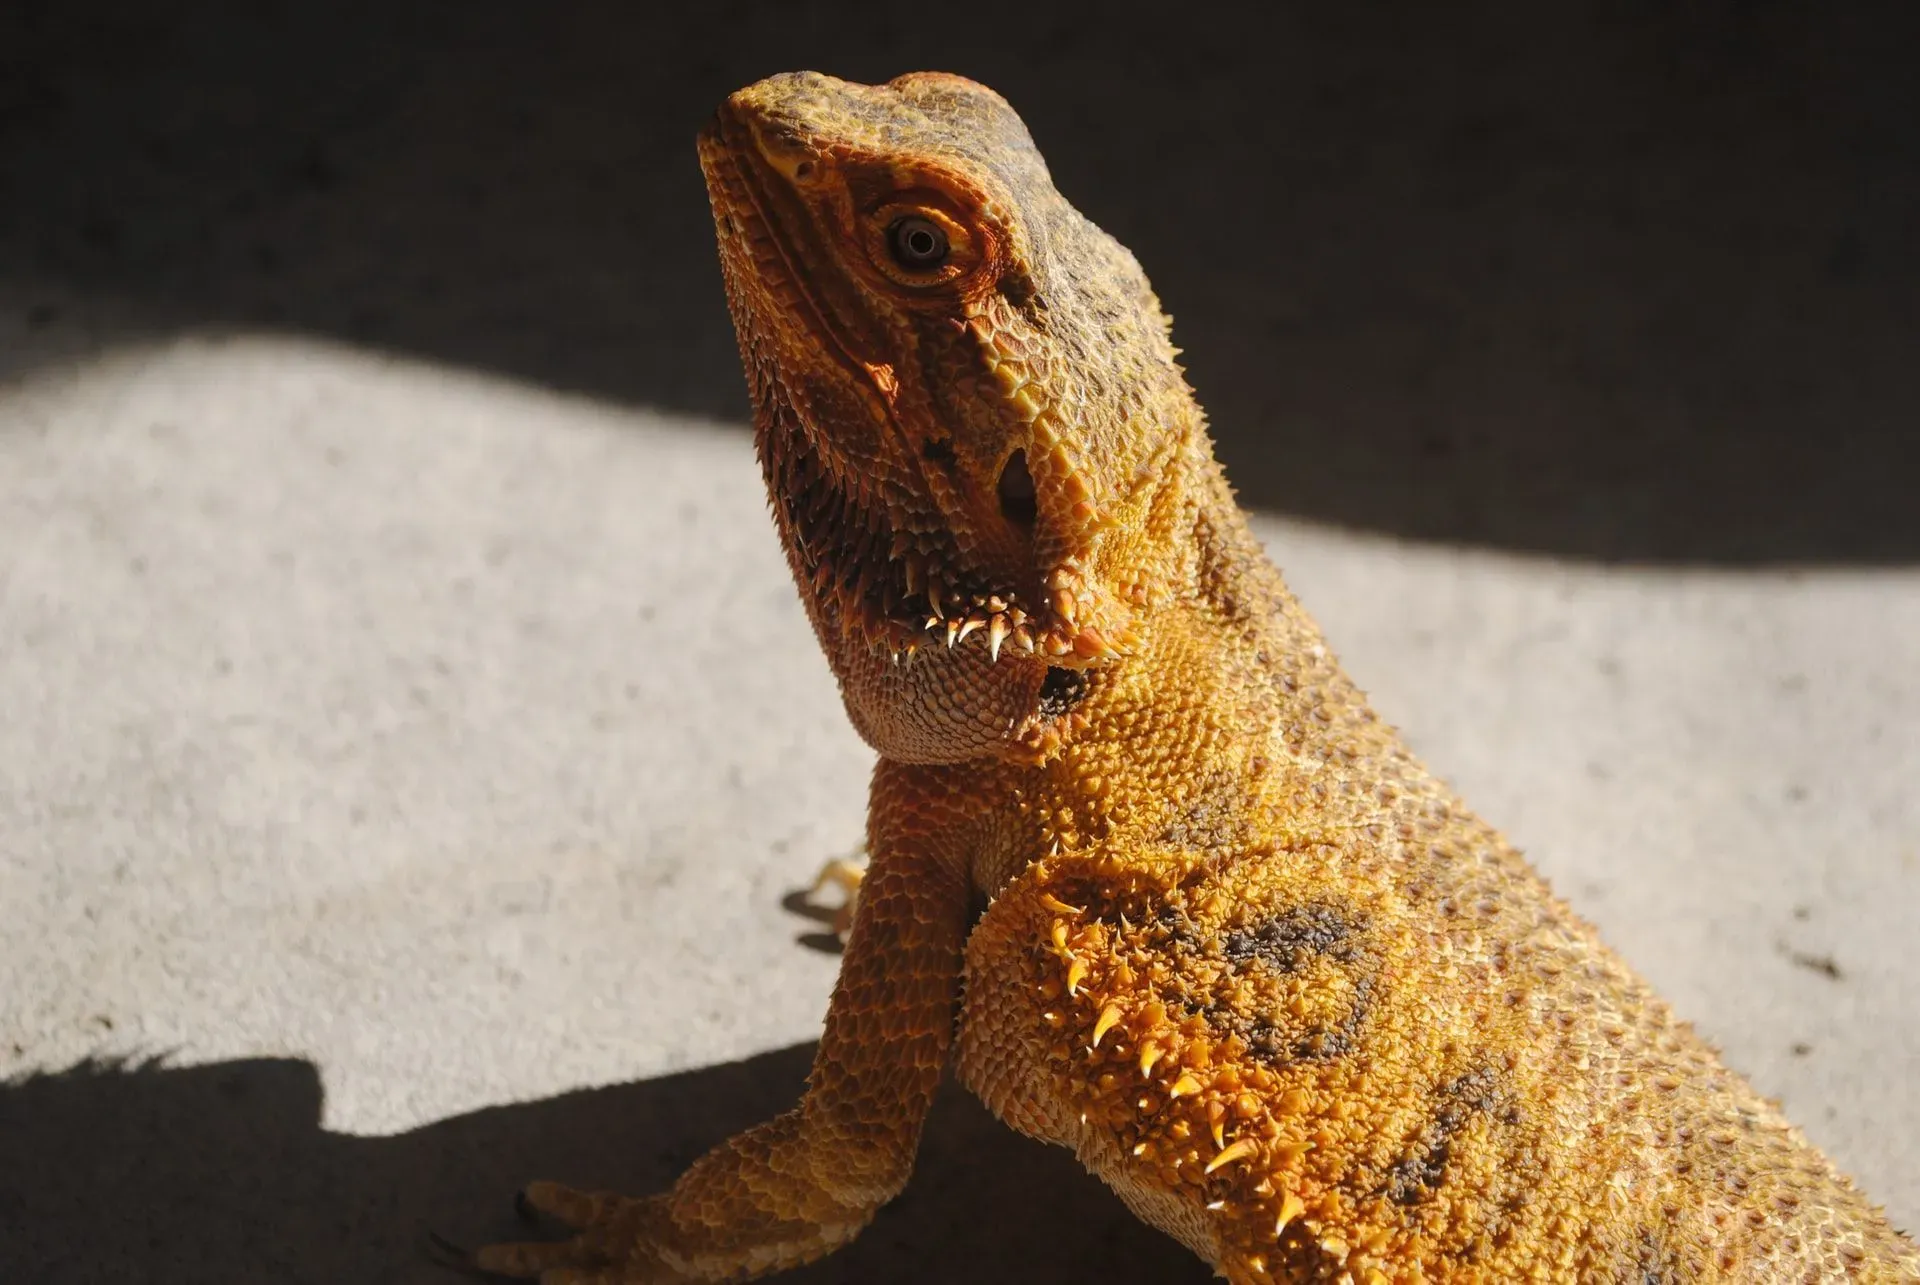 Can bearded dragons eat kale? Yes, bearded dragons can eat kale.